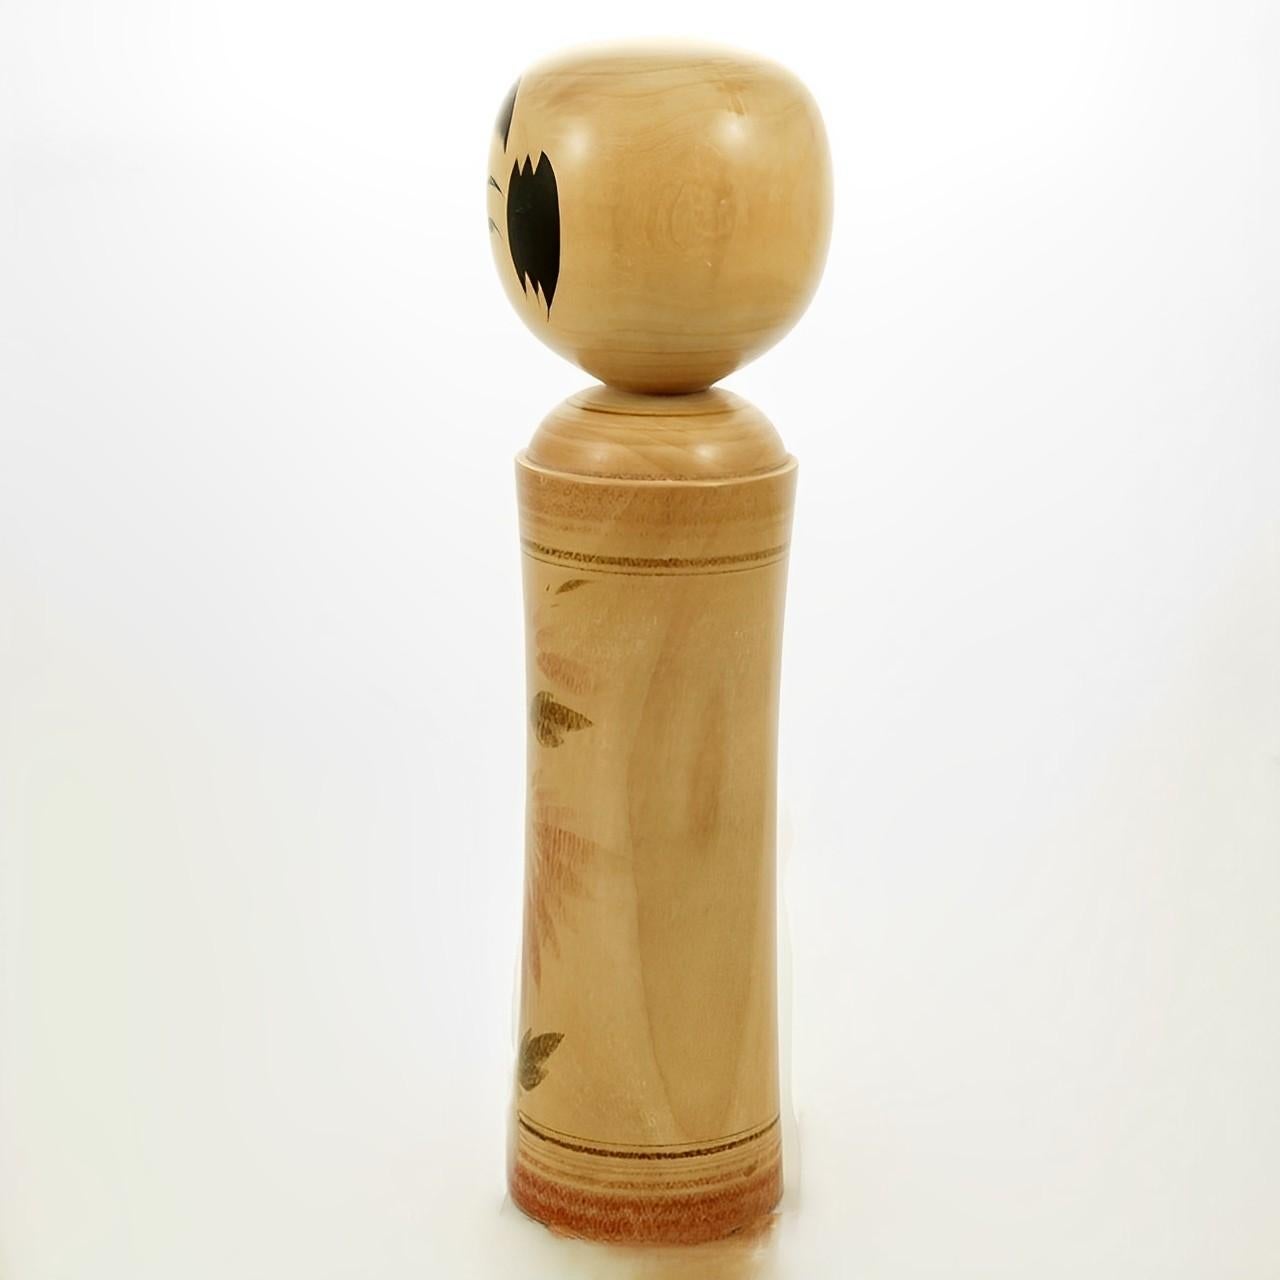 Japanese Kokeshi folk art wood doll by Kumagai Otsu. There are ten types of Kokeshi doll, this is the Naruko variety. Measuring height 23.5 cm / 9.25 inches by diameter at the base 5.7 cm / 2.24 inches. The Kokeshi doll is in very good condition,